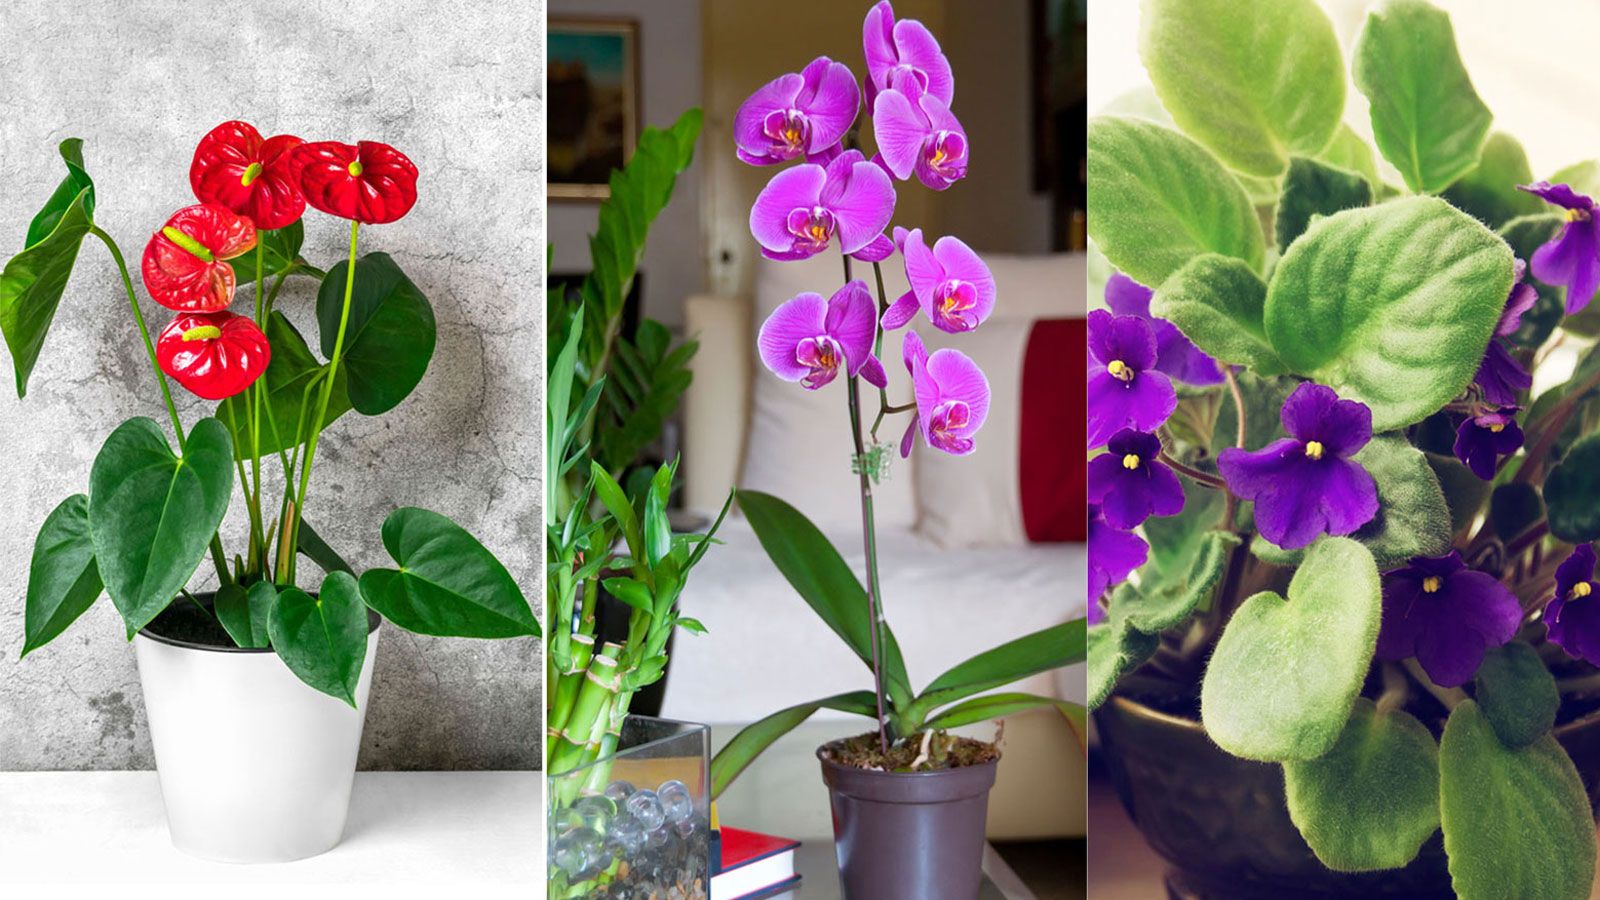 10 indoor plants that flower all year round – choose from our expert ...